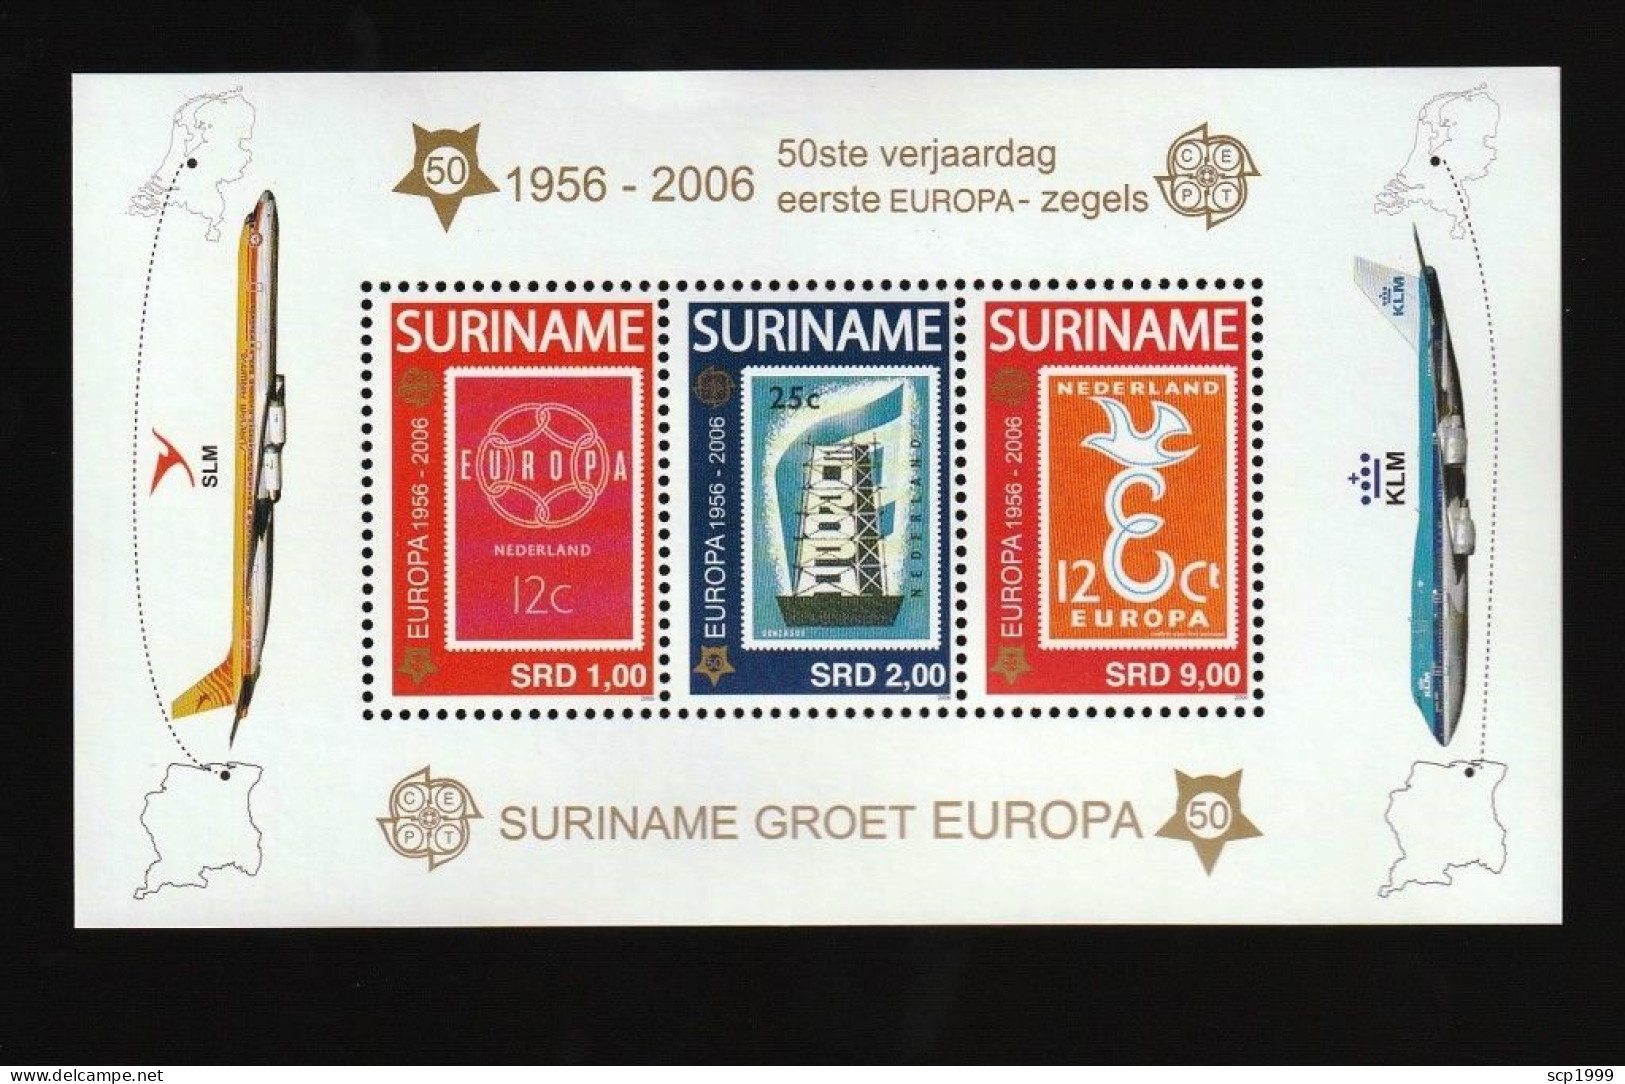 Suriname 2006 - Europa 50 Years Stamps S/S MNH - Suriname